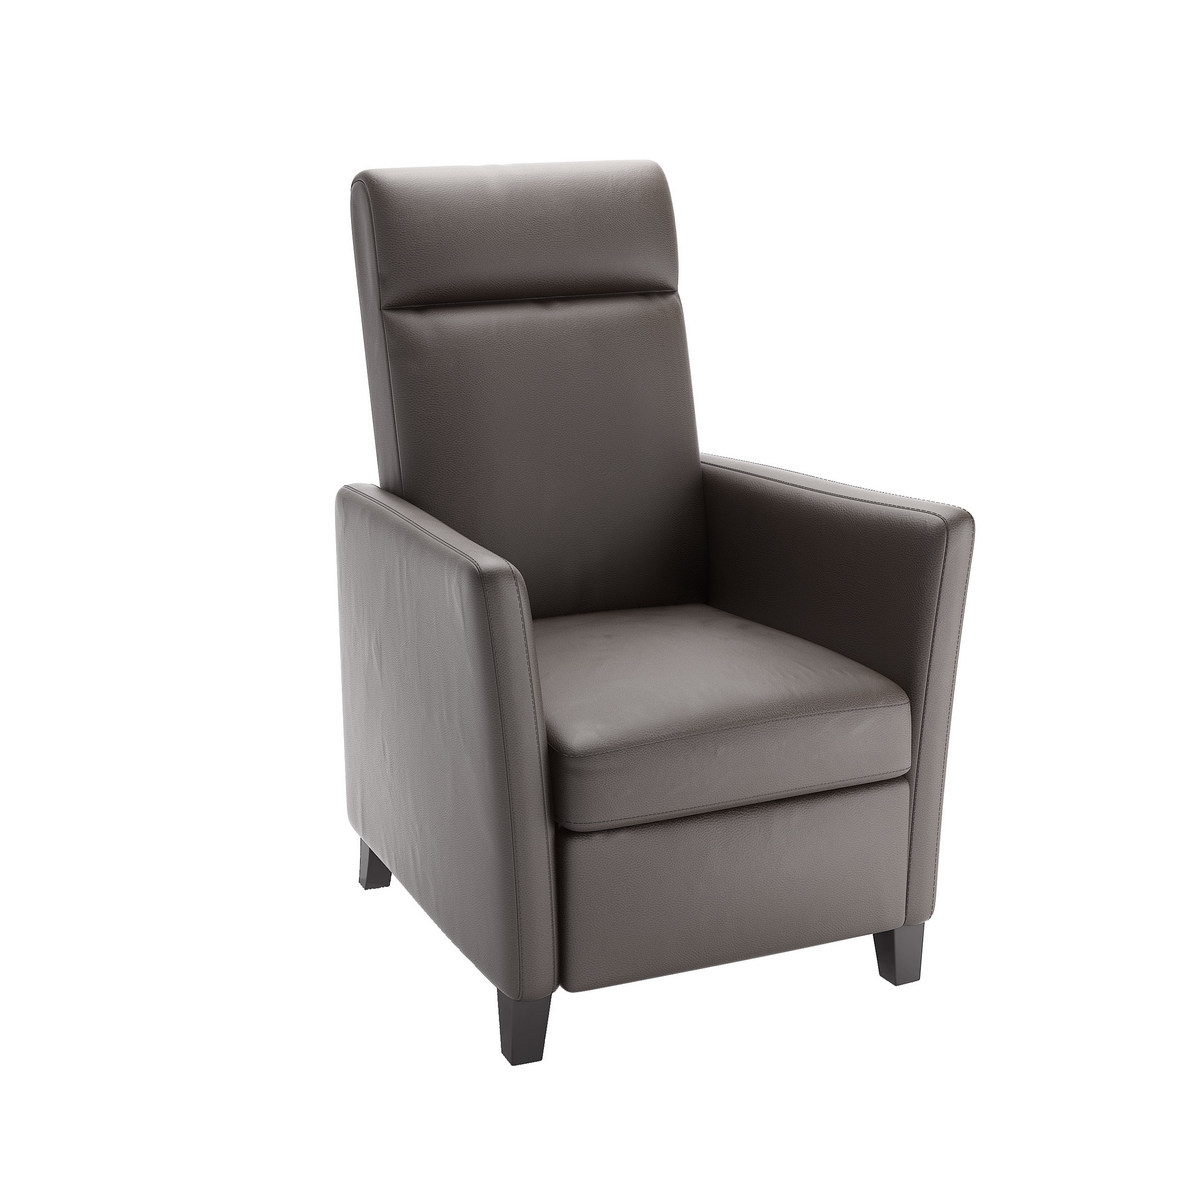 CorLiving LZY-525-R Elise Brownish-Grey Bonded Leather Recliner - Recliners